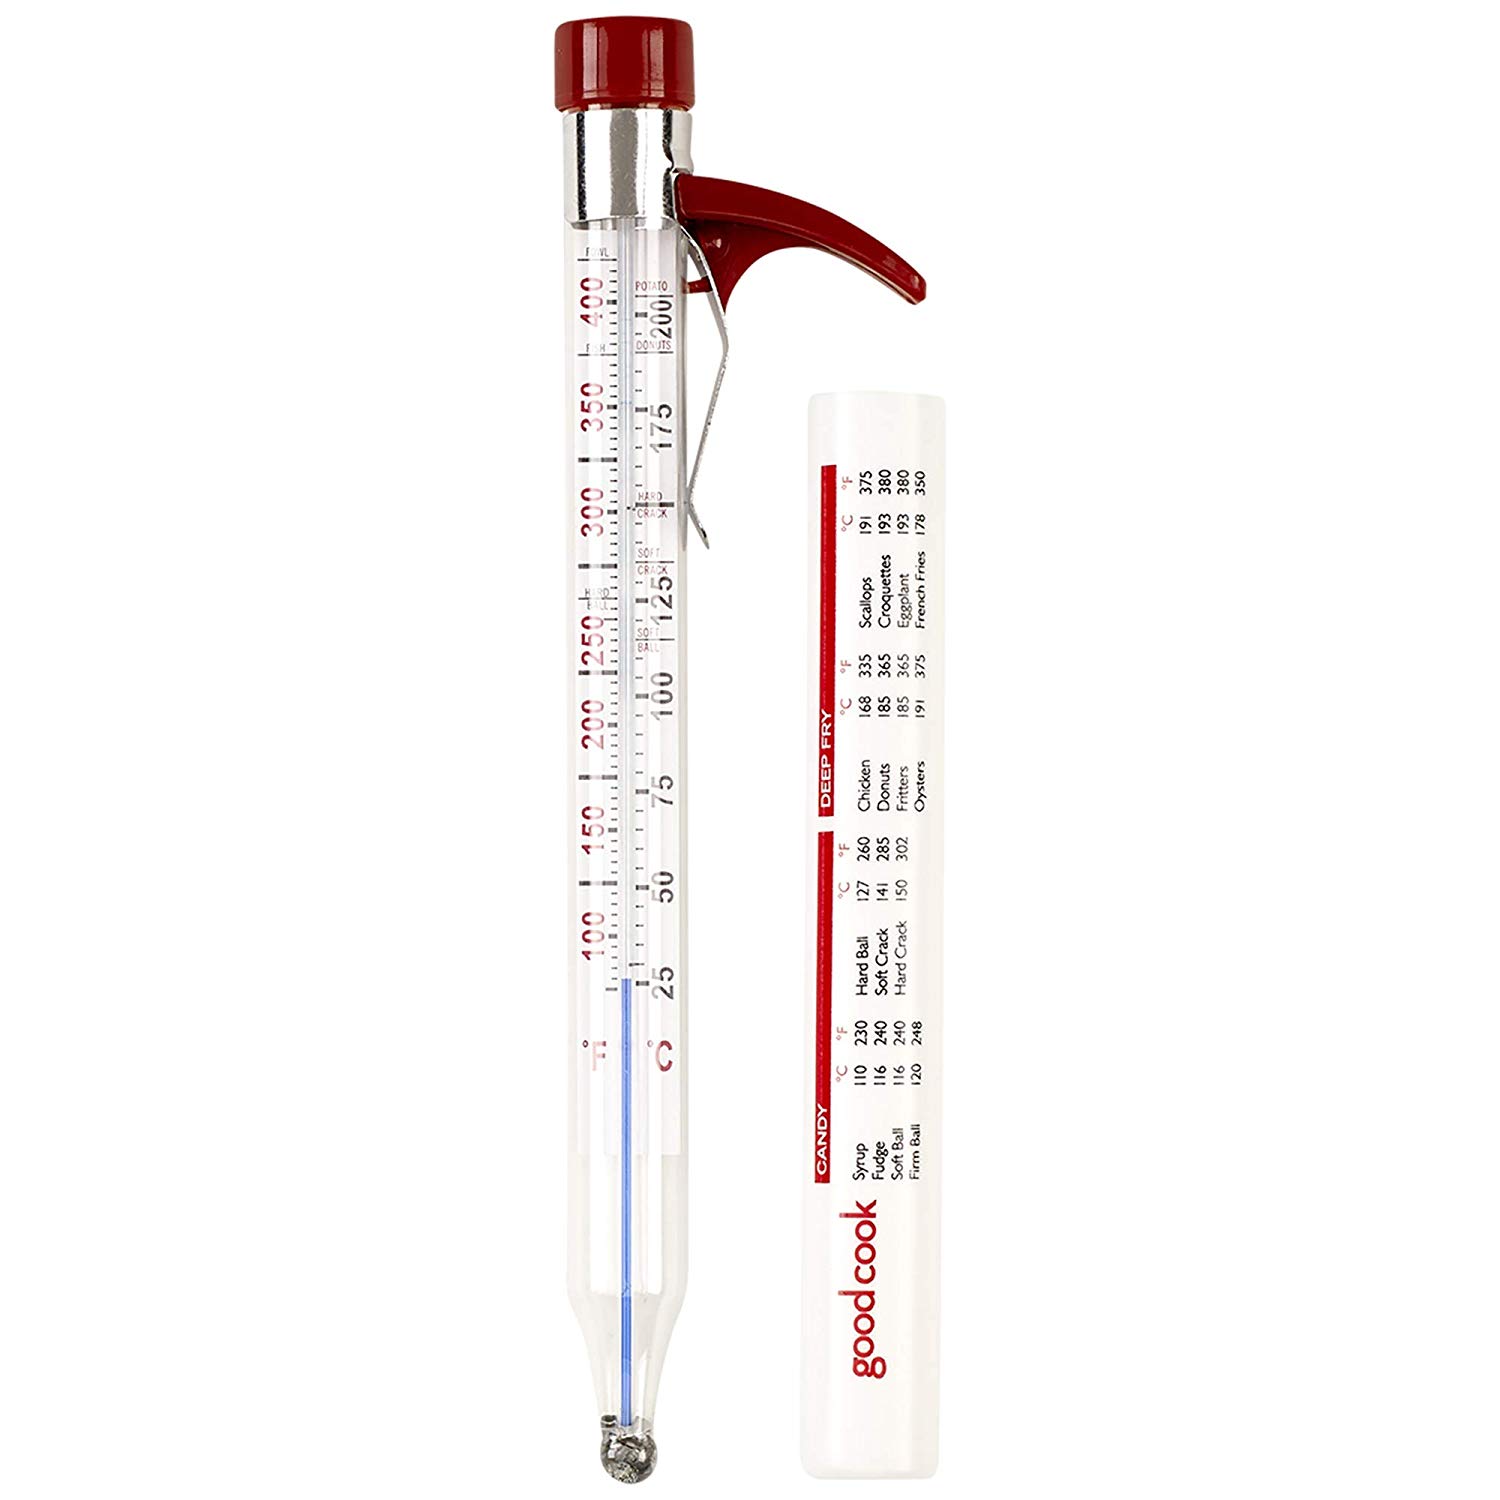 https://www.thelastbyte.com/wp-content/uploads/2018/12/good-cook-thermometer-3.jpg